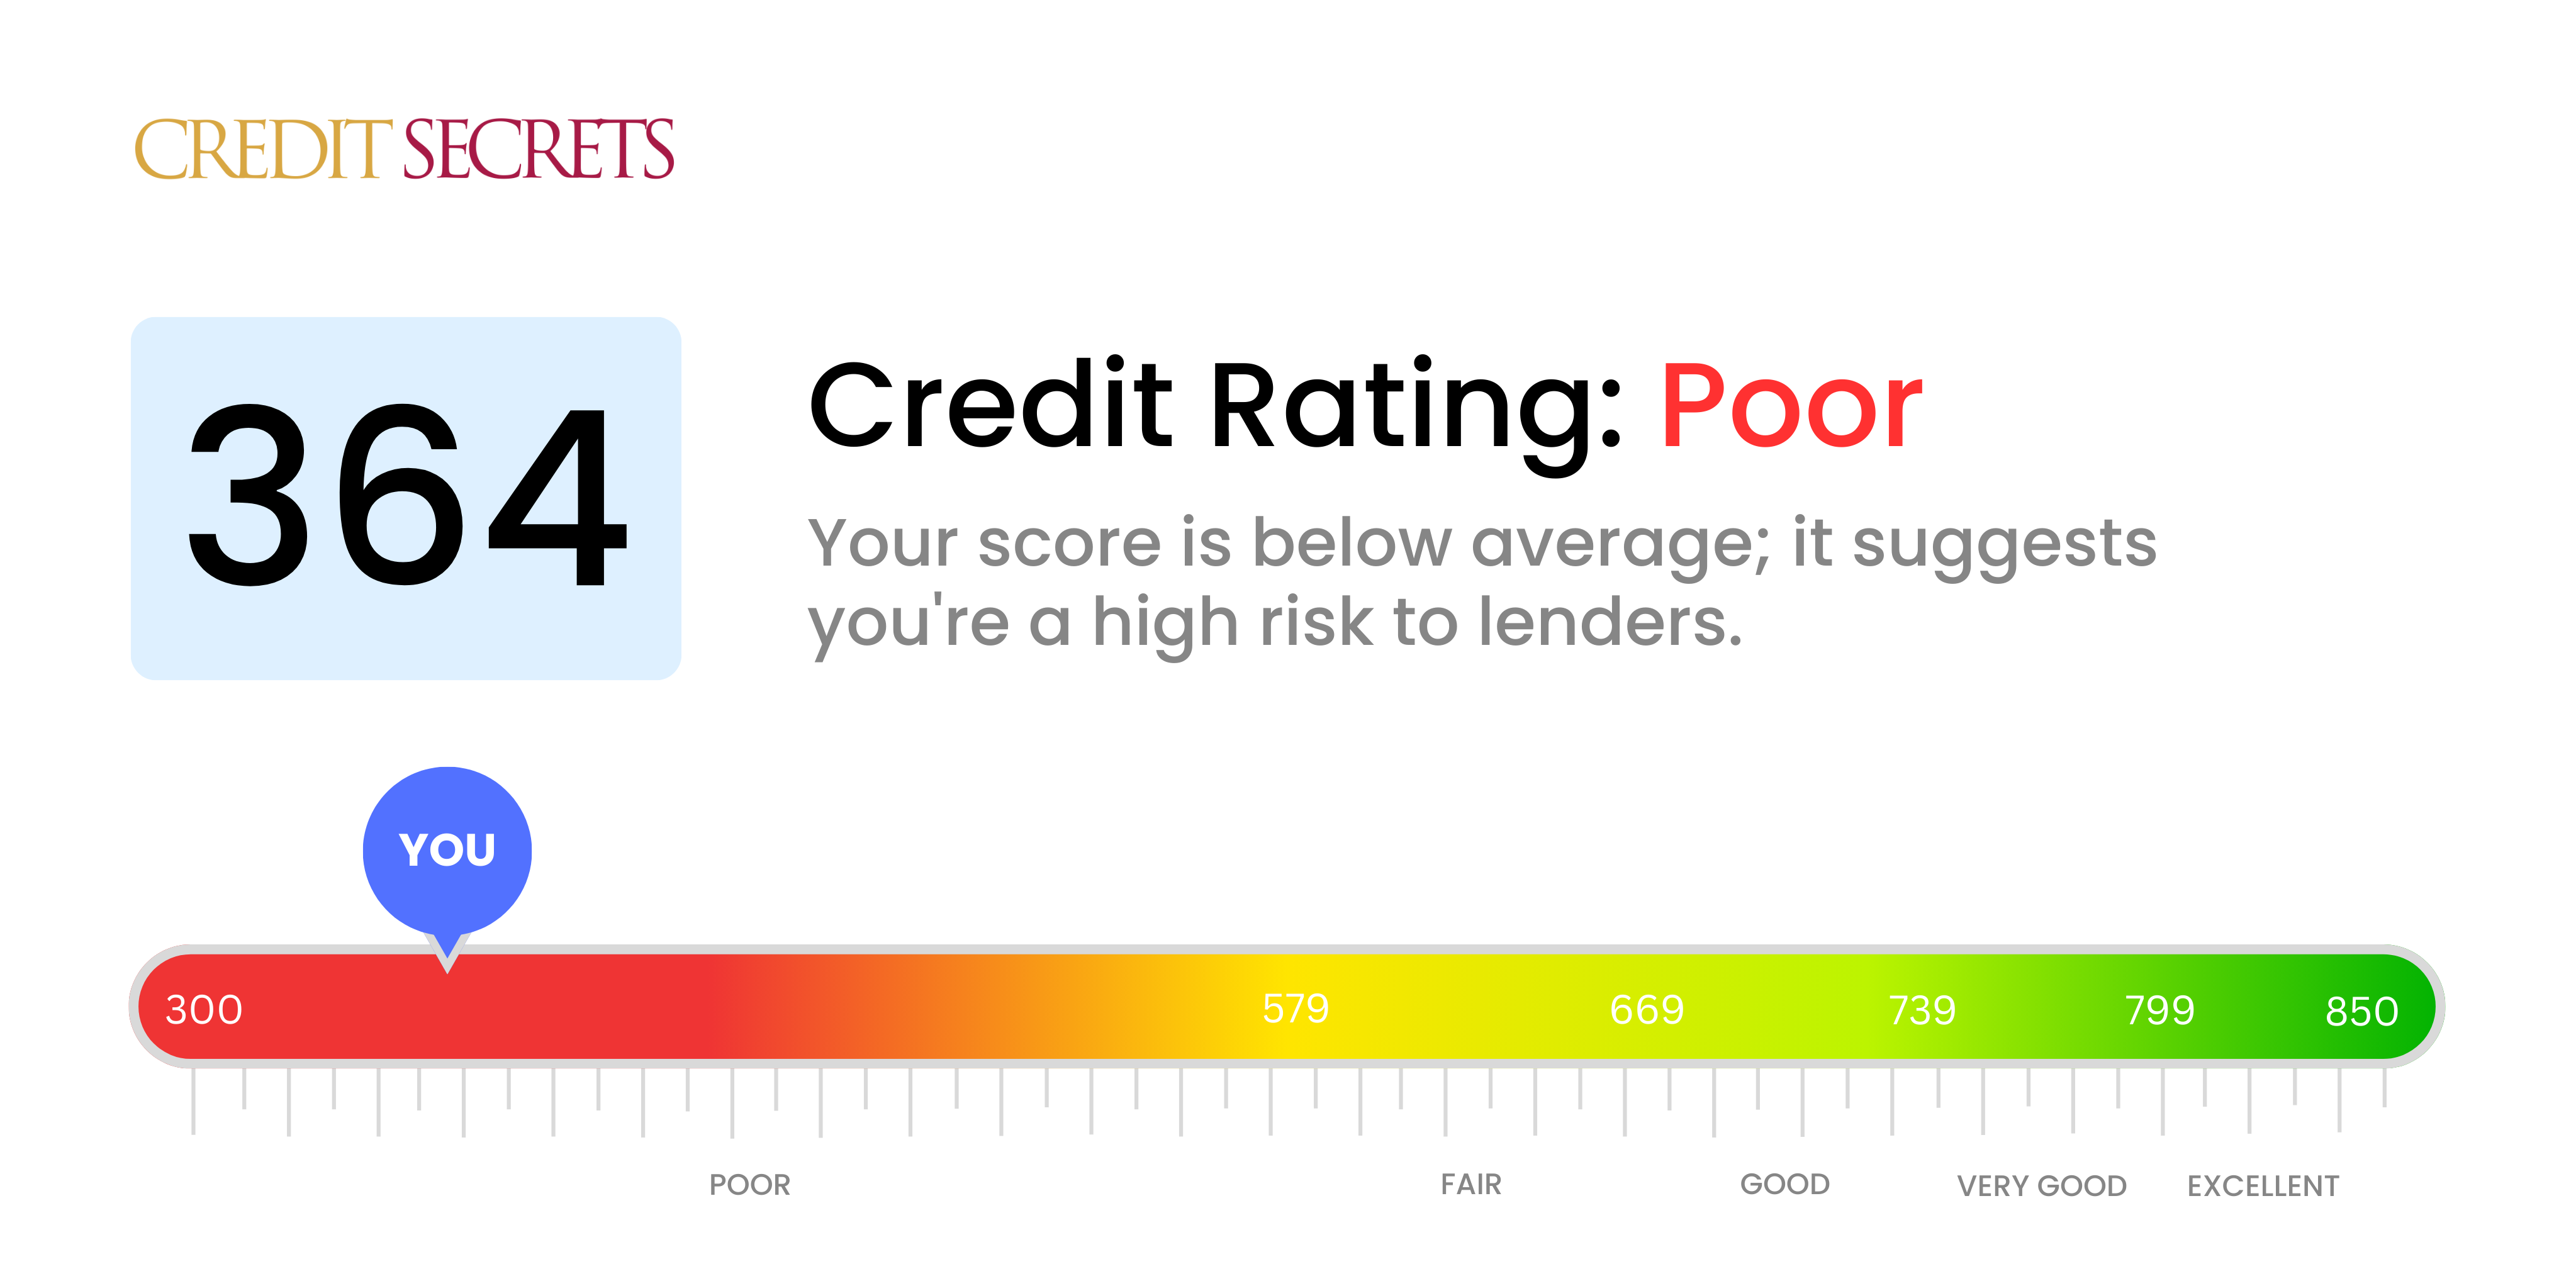 Is 364 a good credit score?